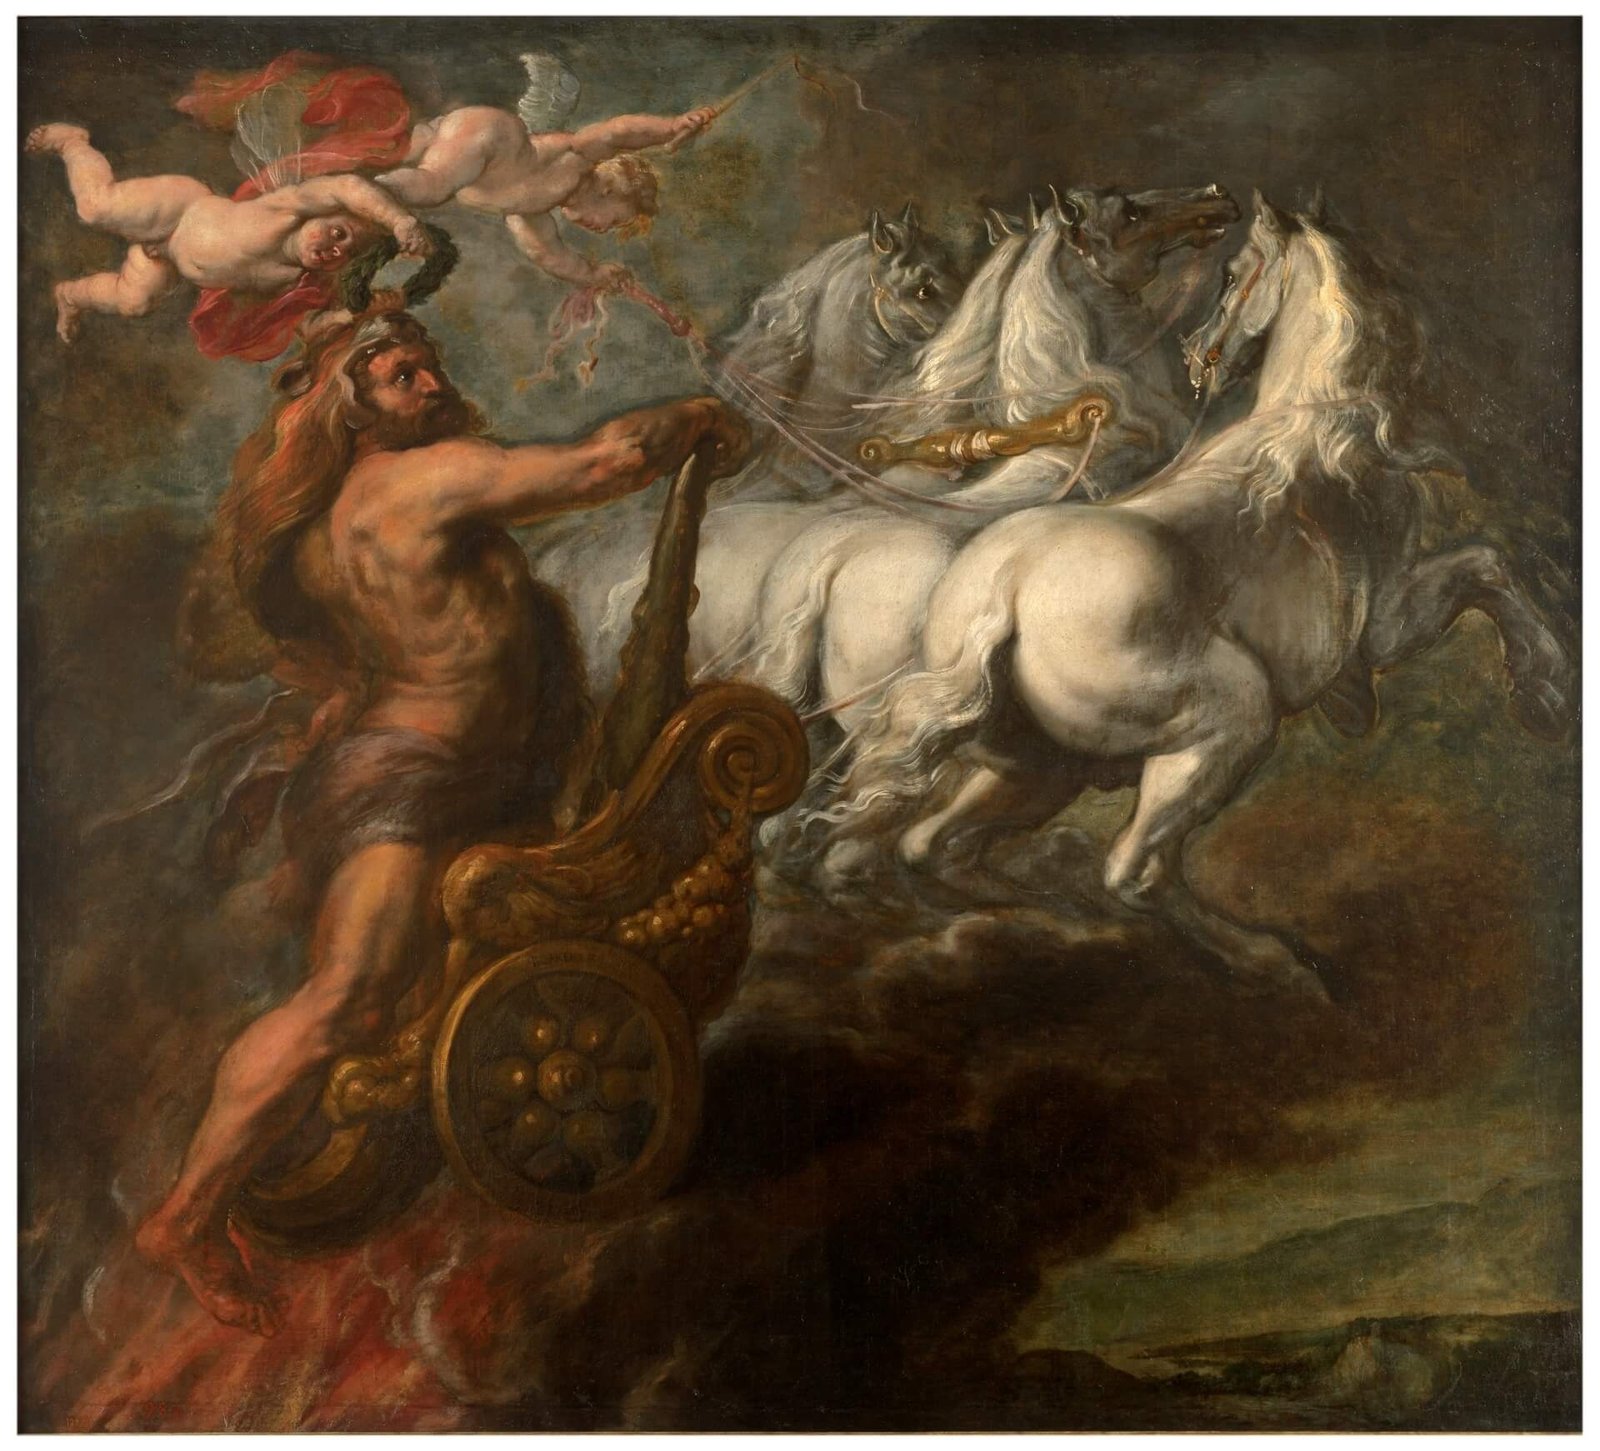 This painting represents Heracles riding a chariot drawn by four white horses.